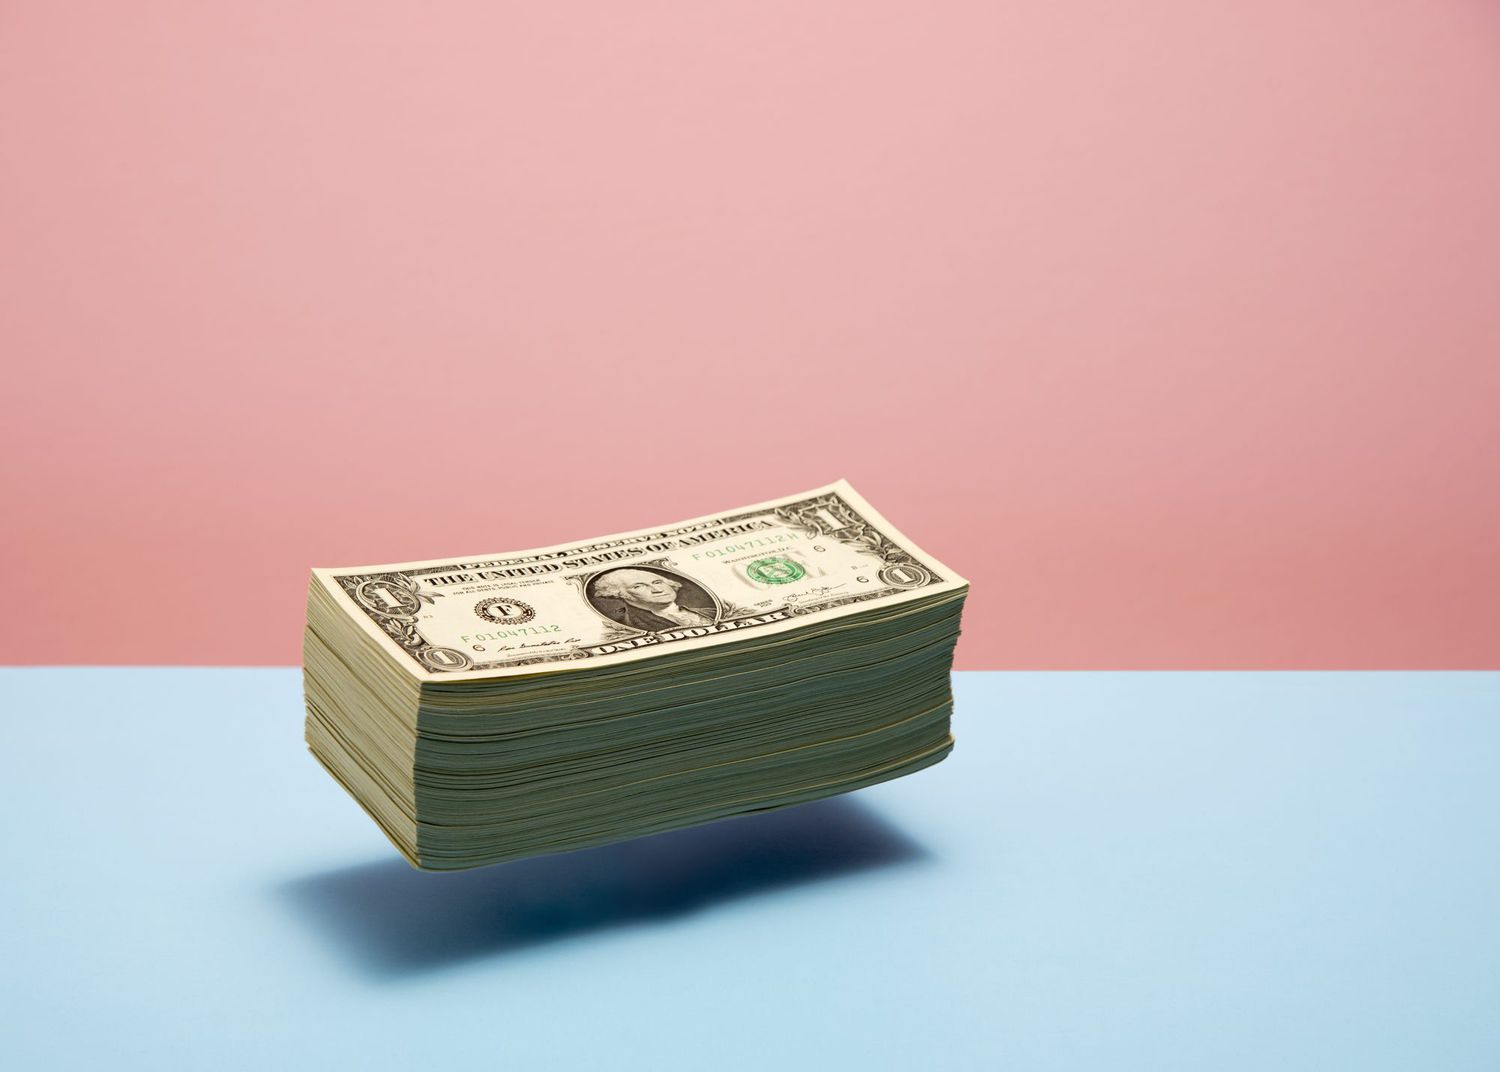 An image of a stack of money floating on a colorful background.